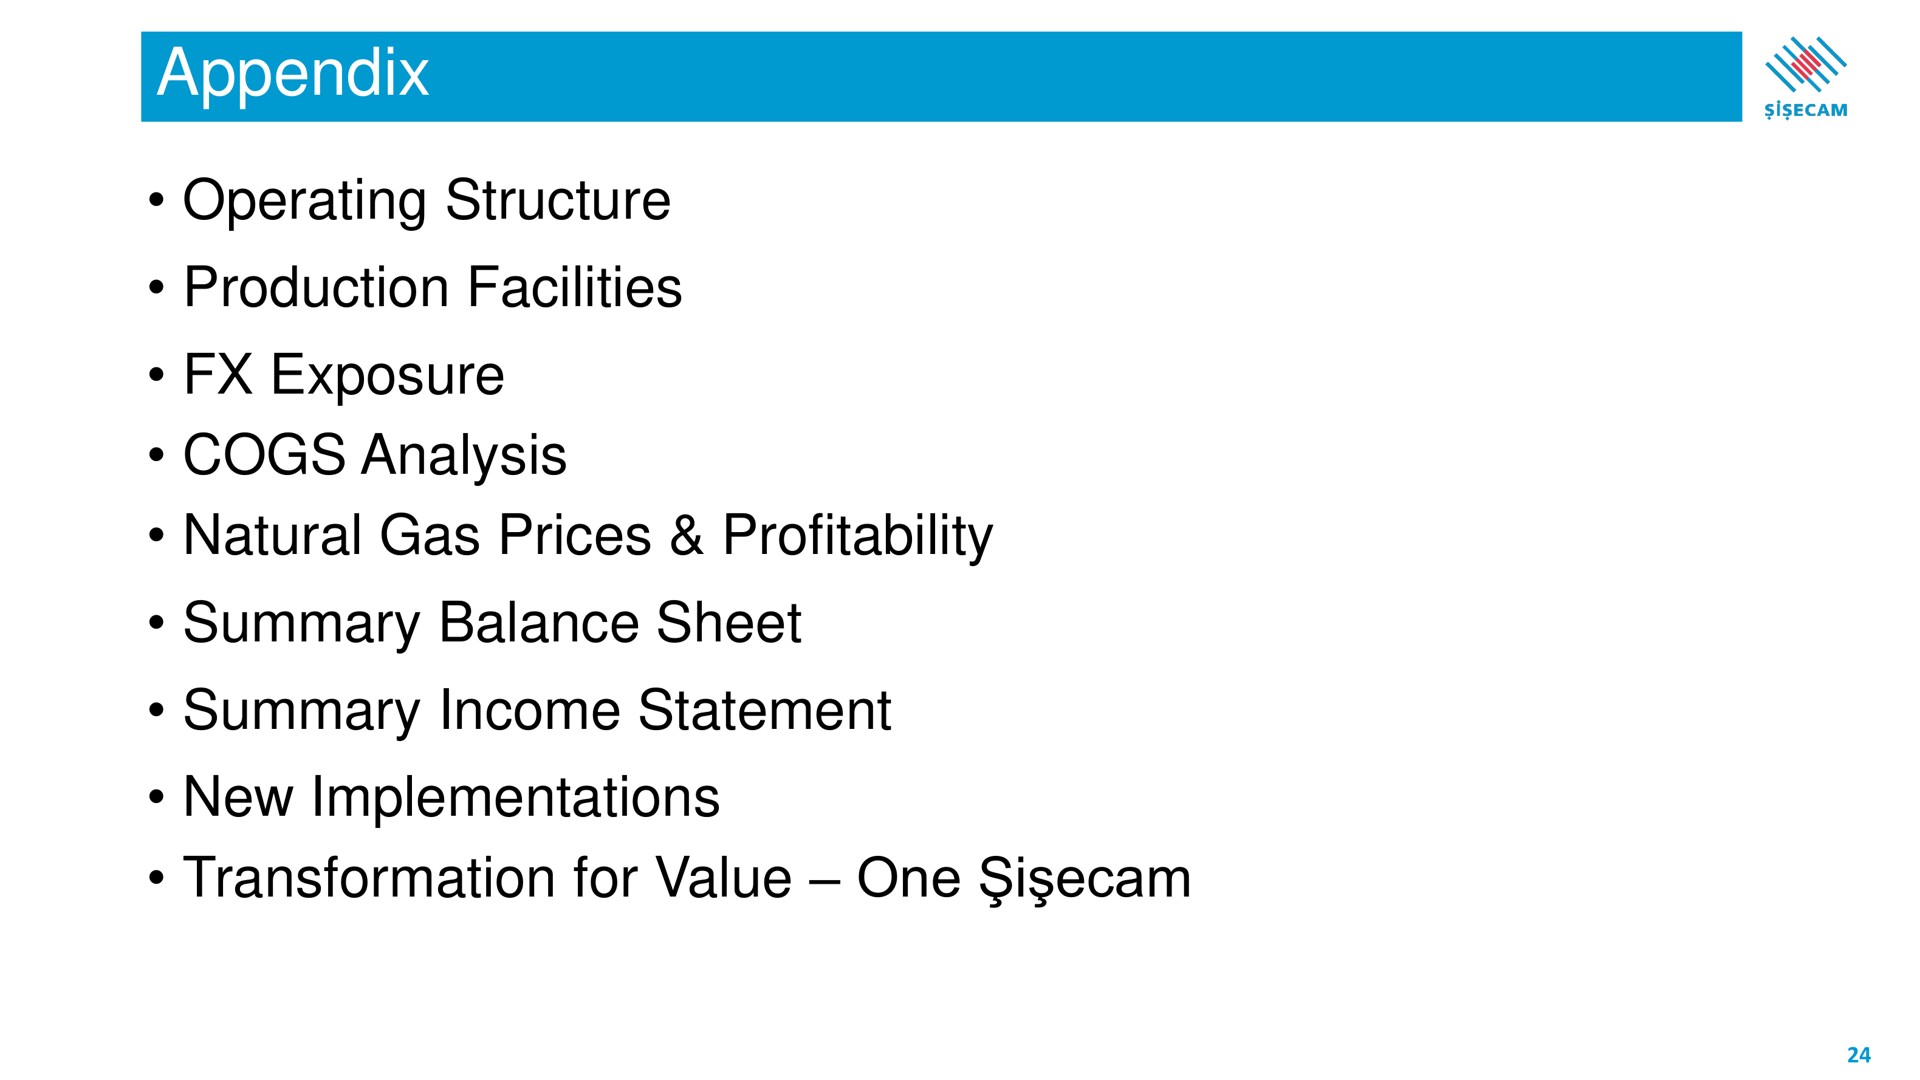 appendix operating structure production facilities exposure cogs analysis natural gas prices profitability summary balance sheet summary income statement new implementations transformation for value one i | Sisecam Resources